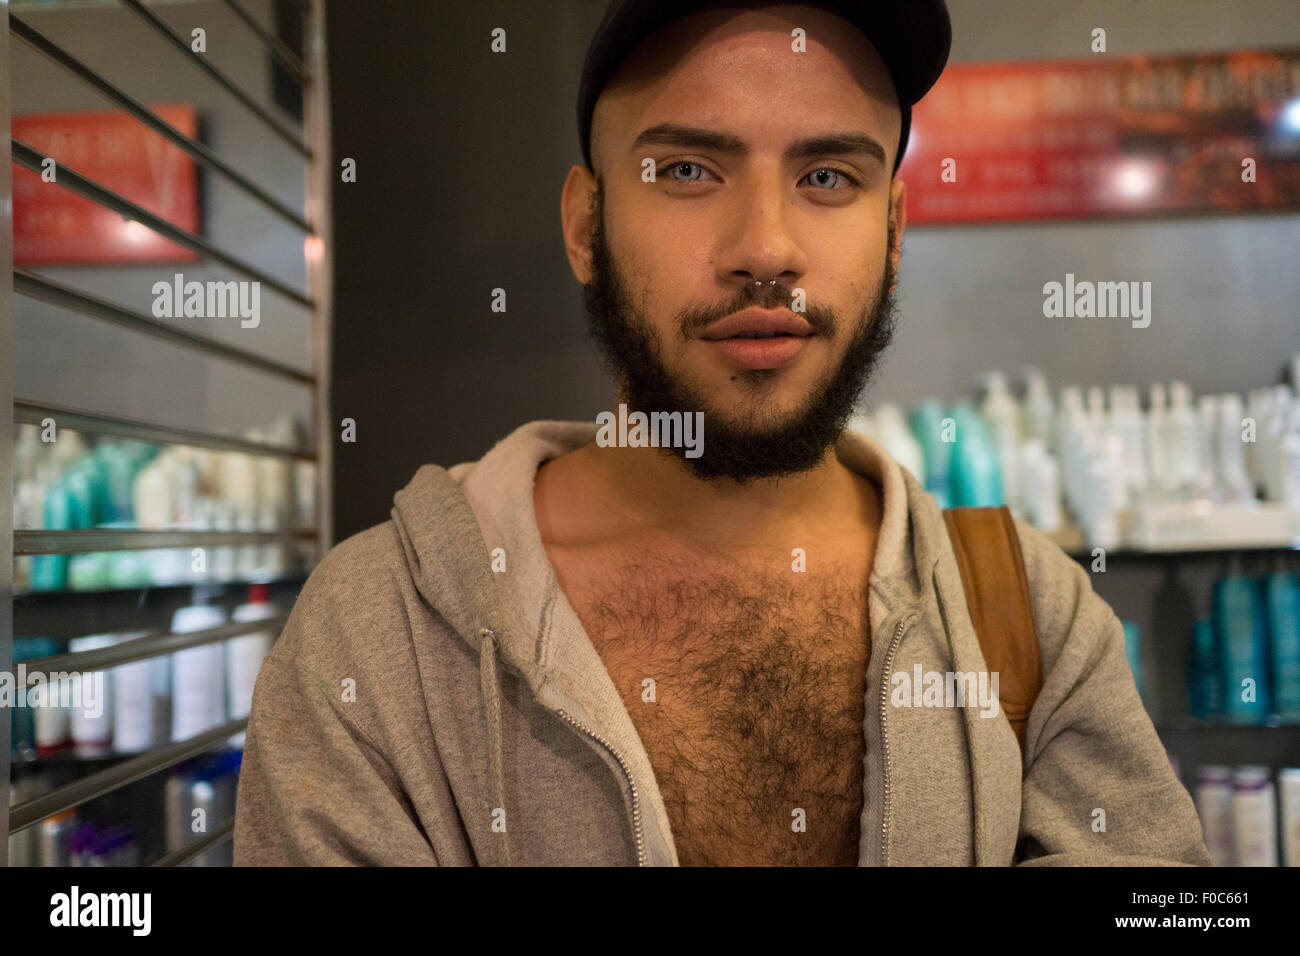 A young man who works as a receptionist in a beauty salon. Aug. 11, 2015 Stock Photo